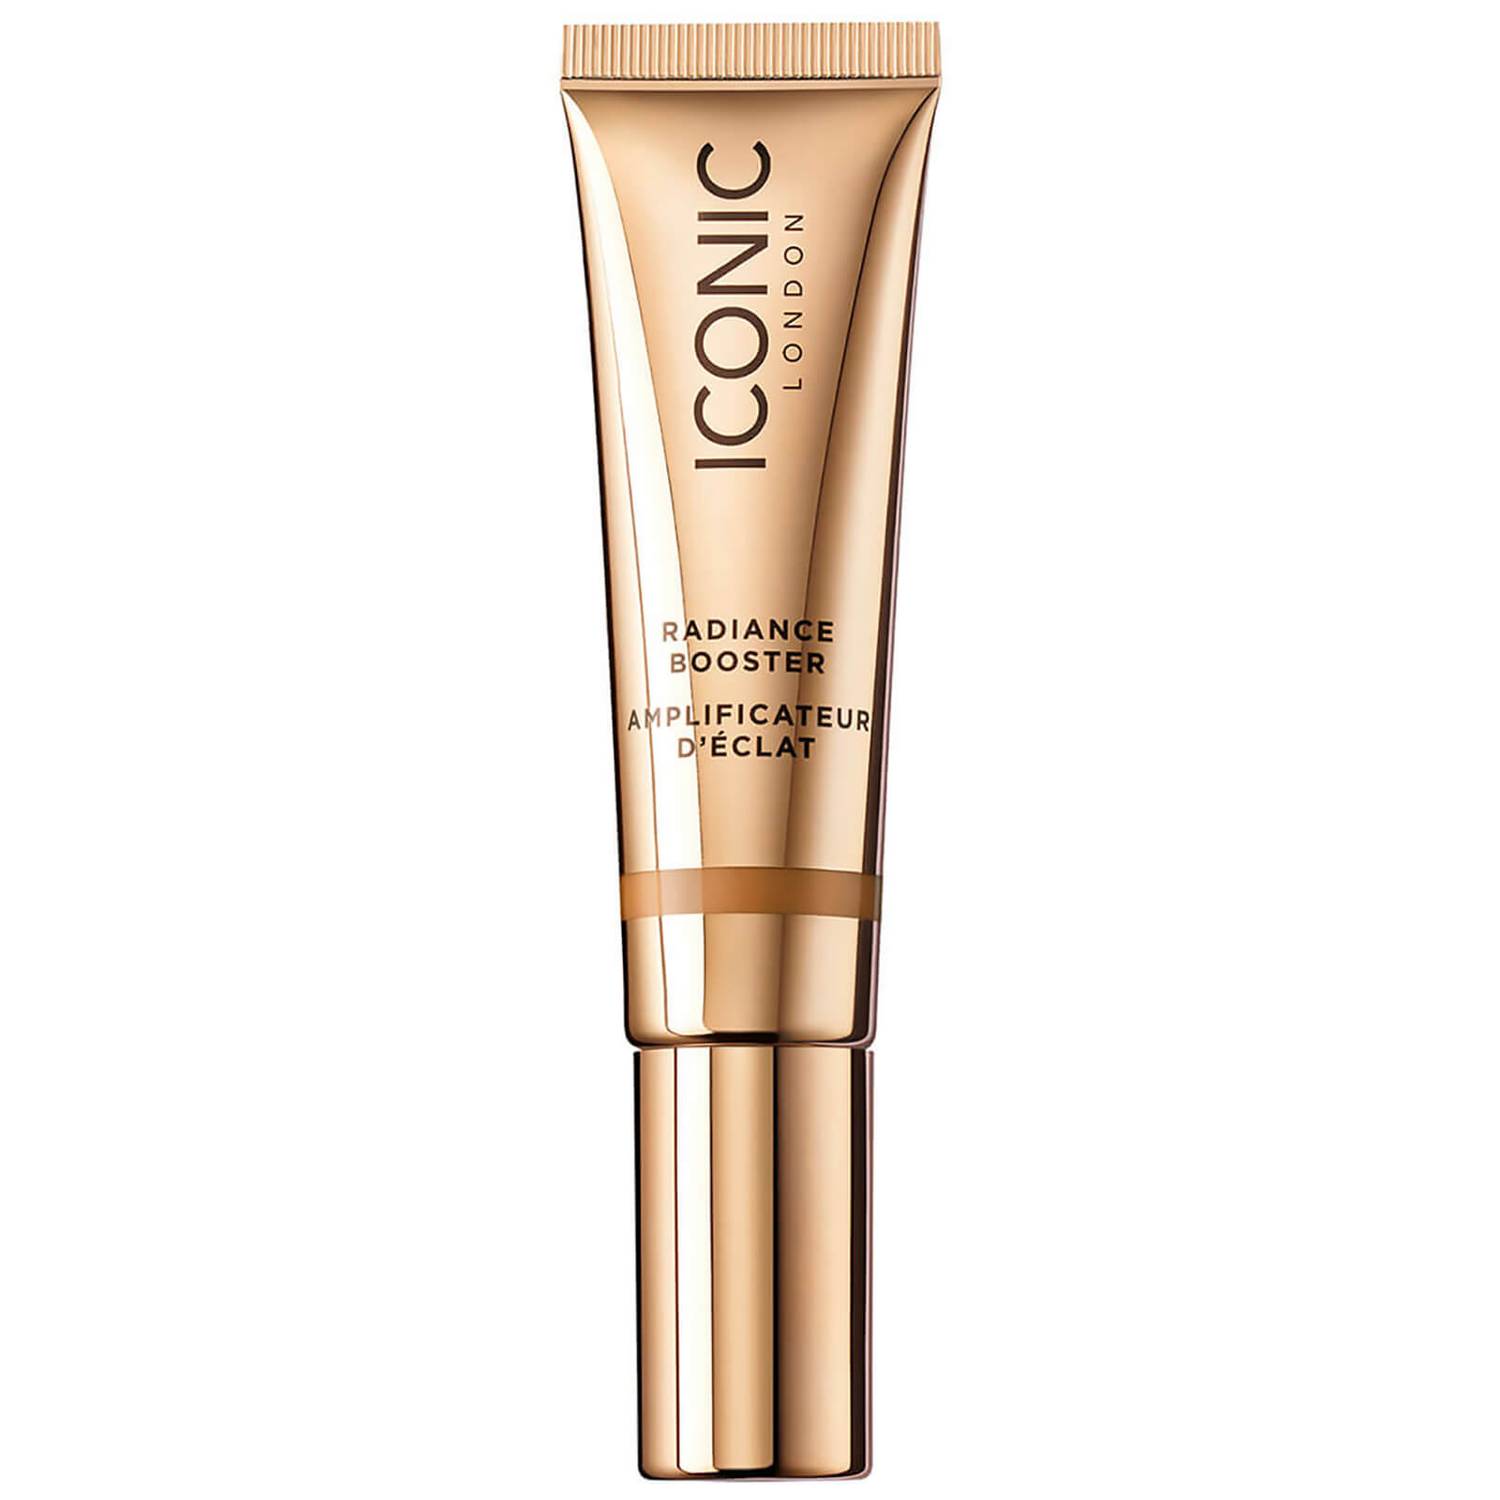 Iconic London - Radiance Booster (Sand Glow)